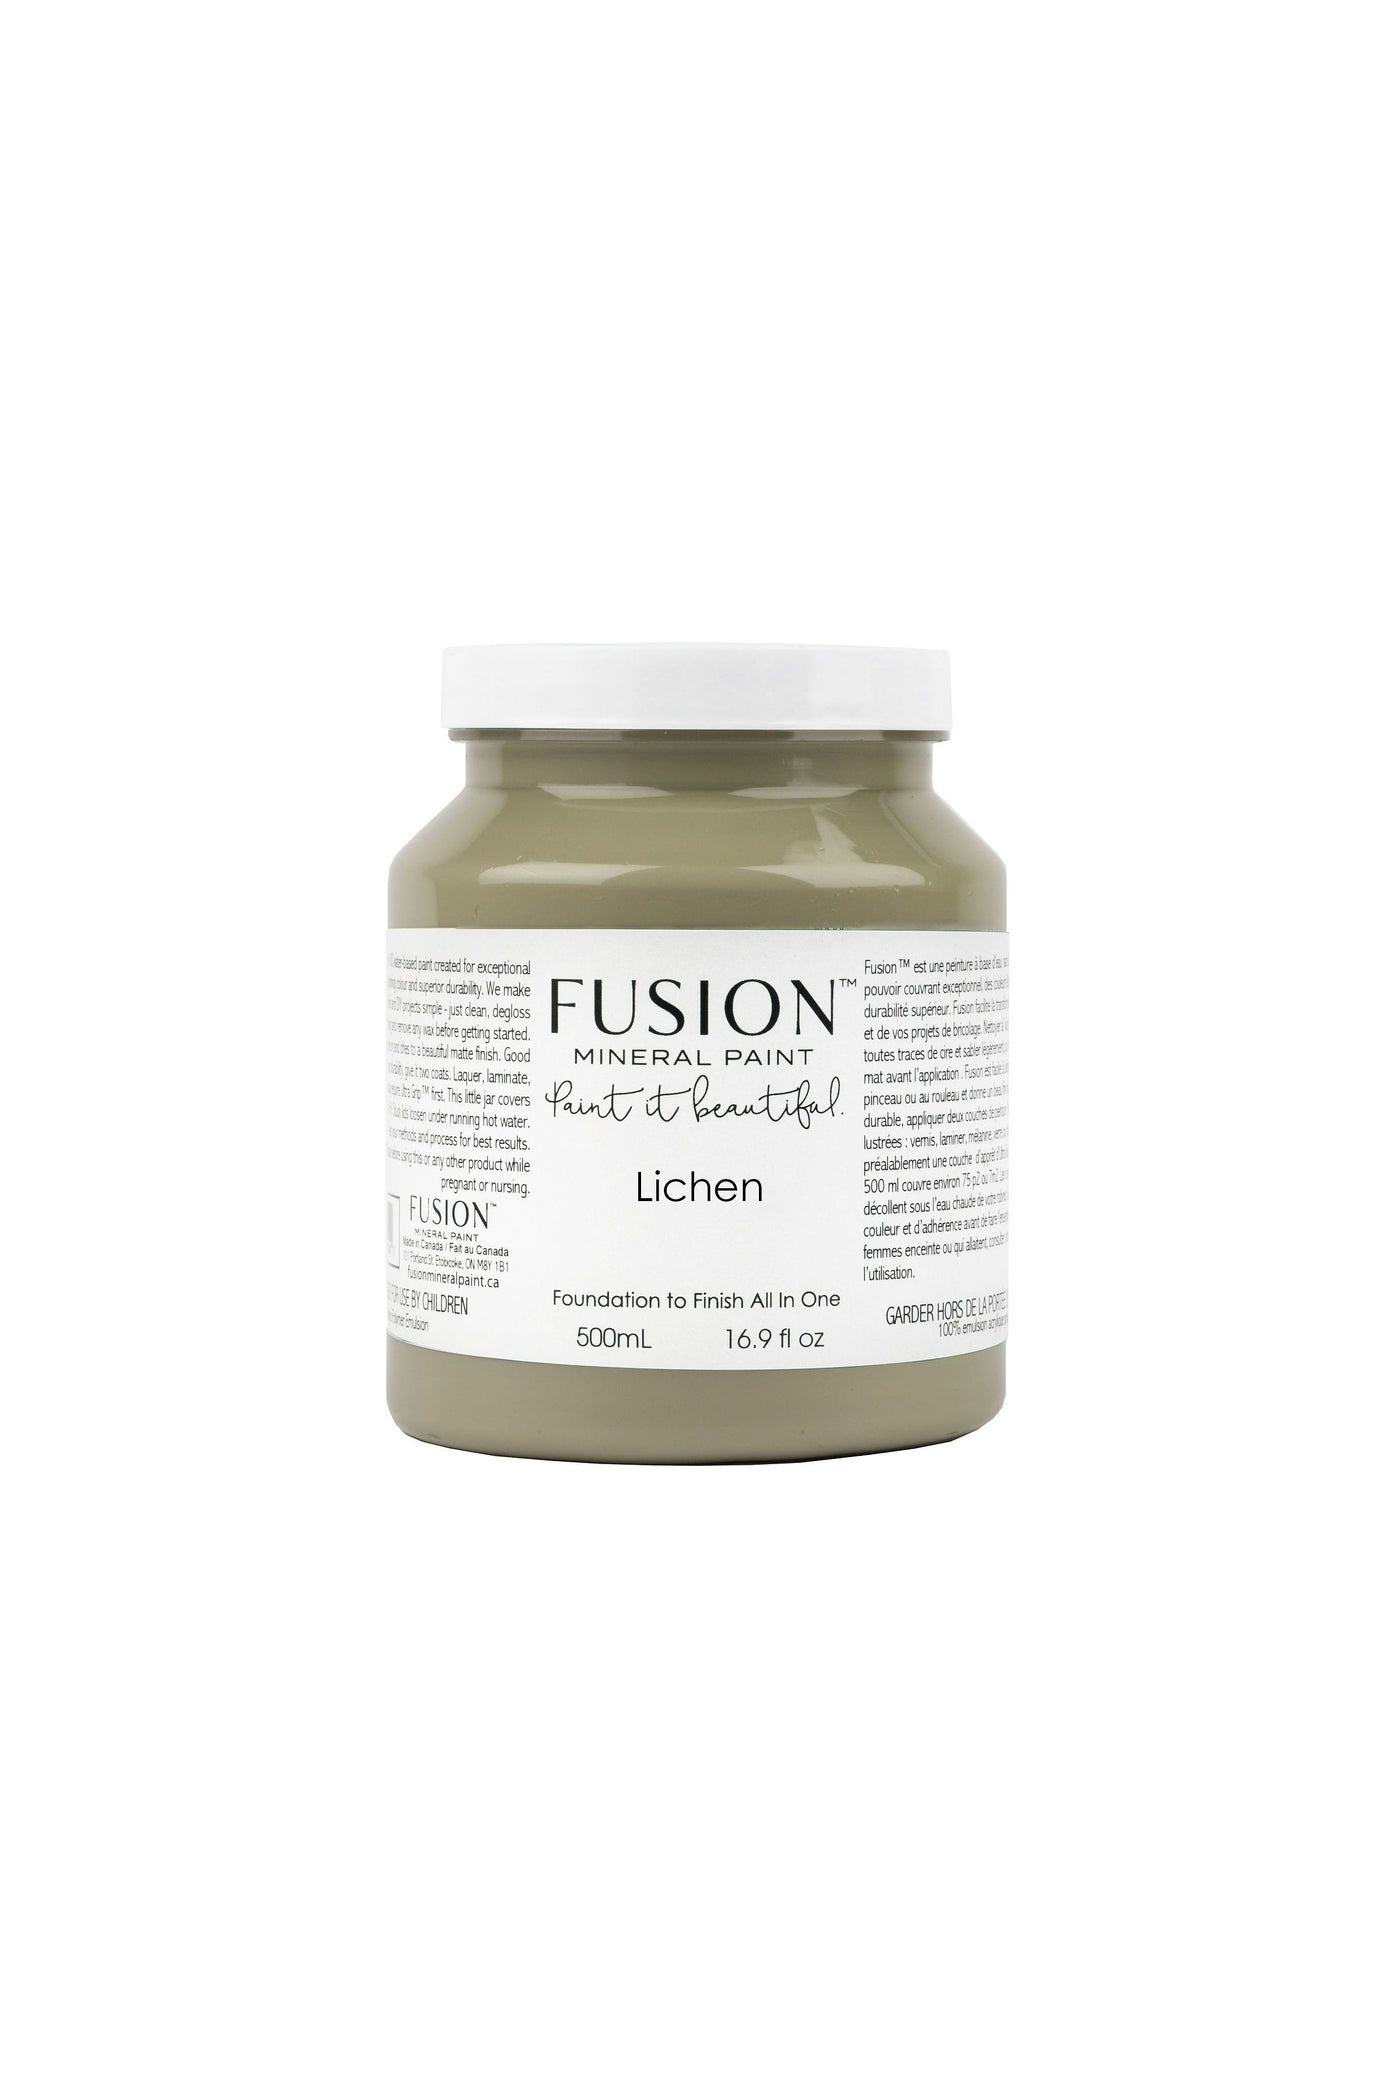 Fusion Mineral Paint - LICHEN mossy grey-green 500ml